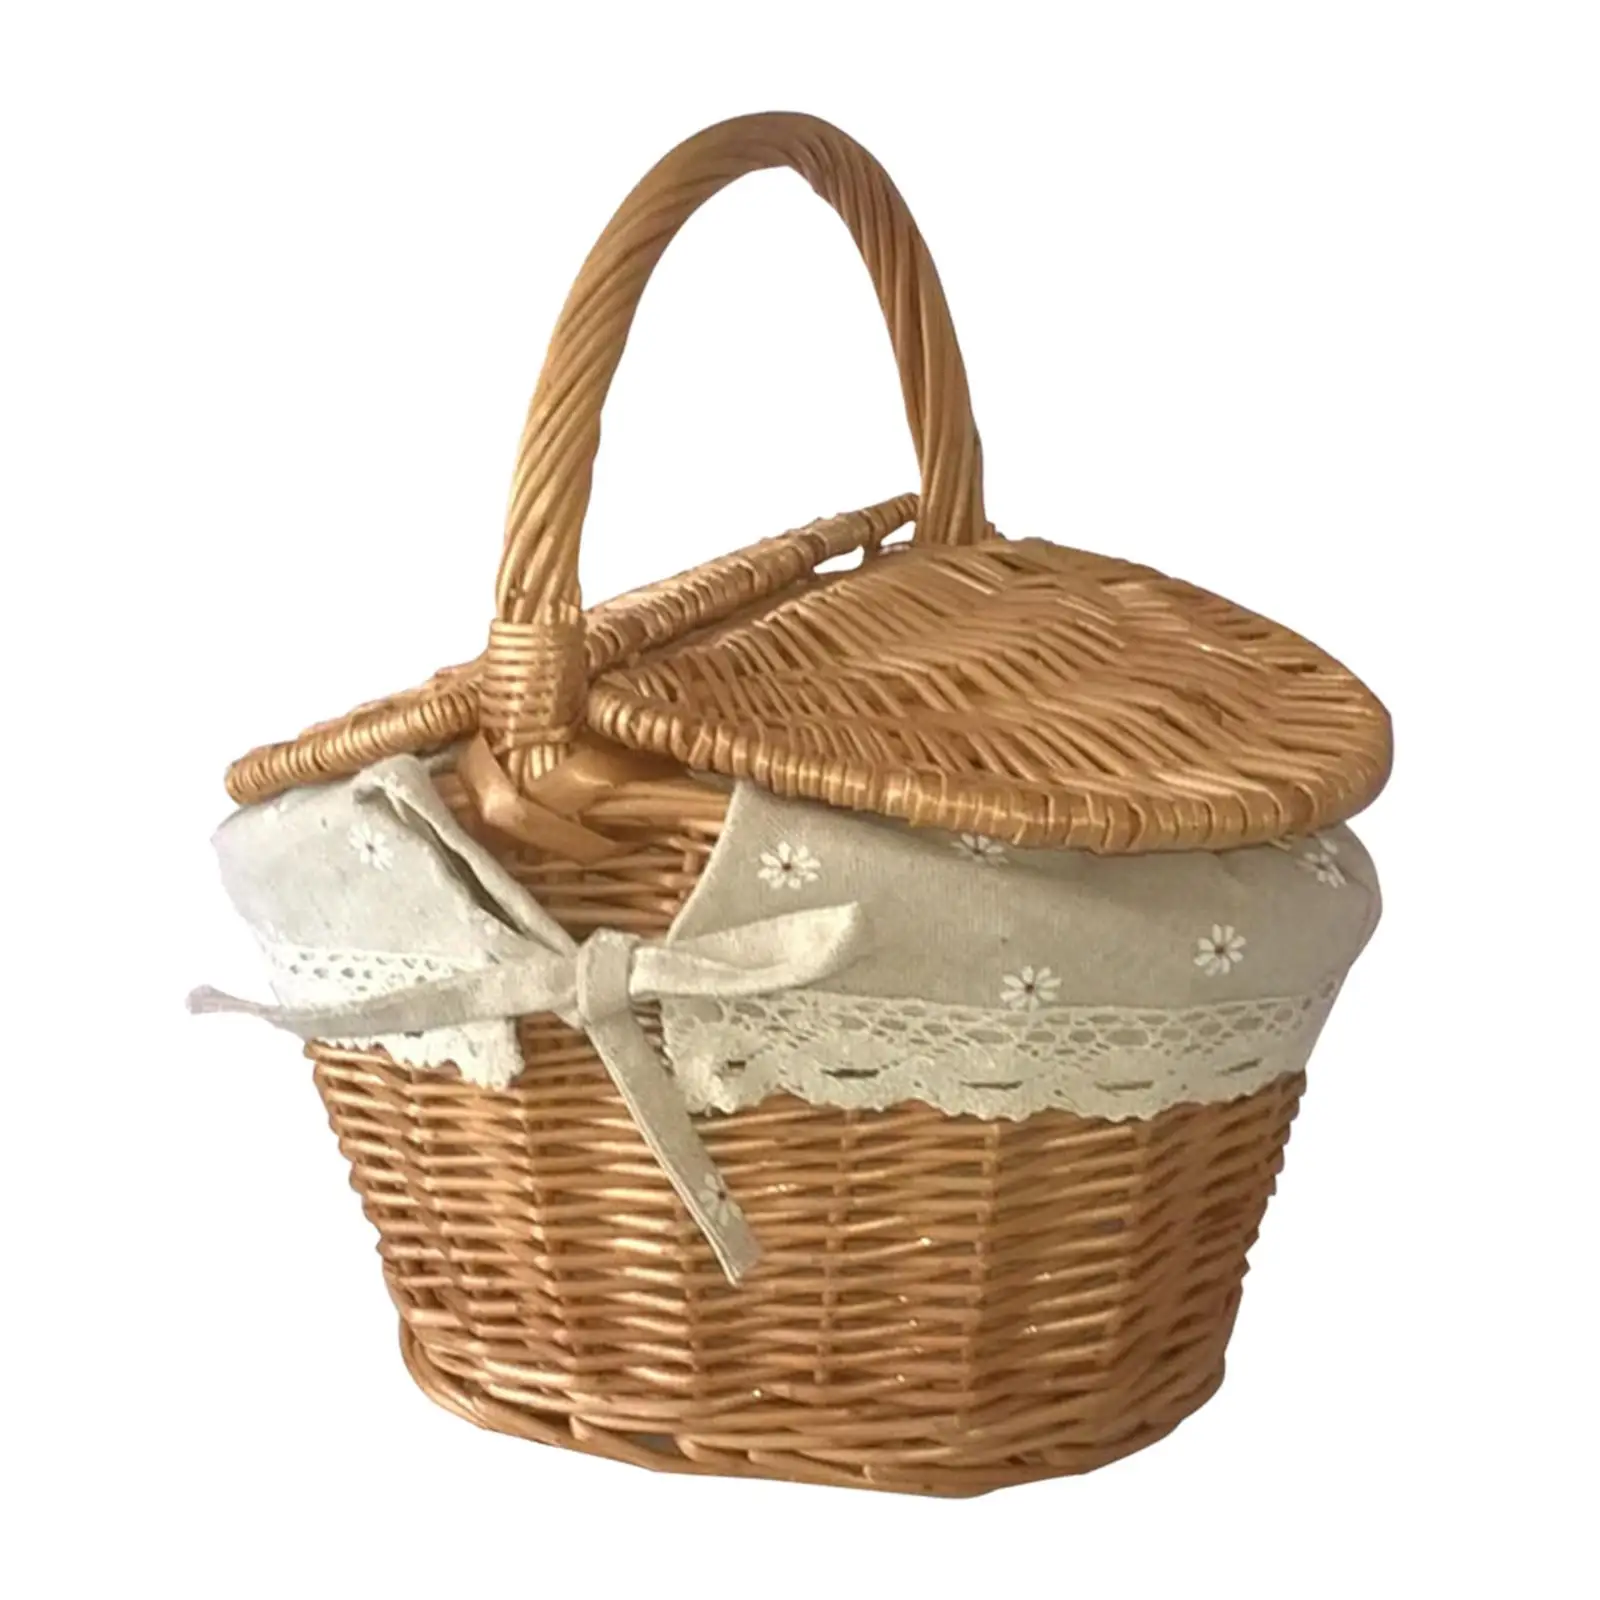 Hand Woven Wicker Picnic Basket Wicker Woven Basket with Washable Lining Rattan Storage Serving Basket for Outdoor Beach Hiking